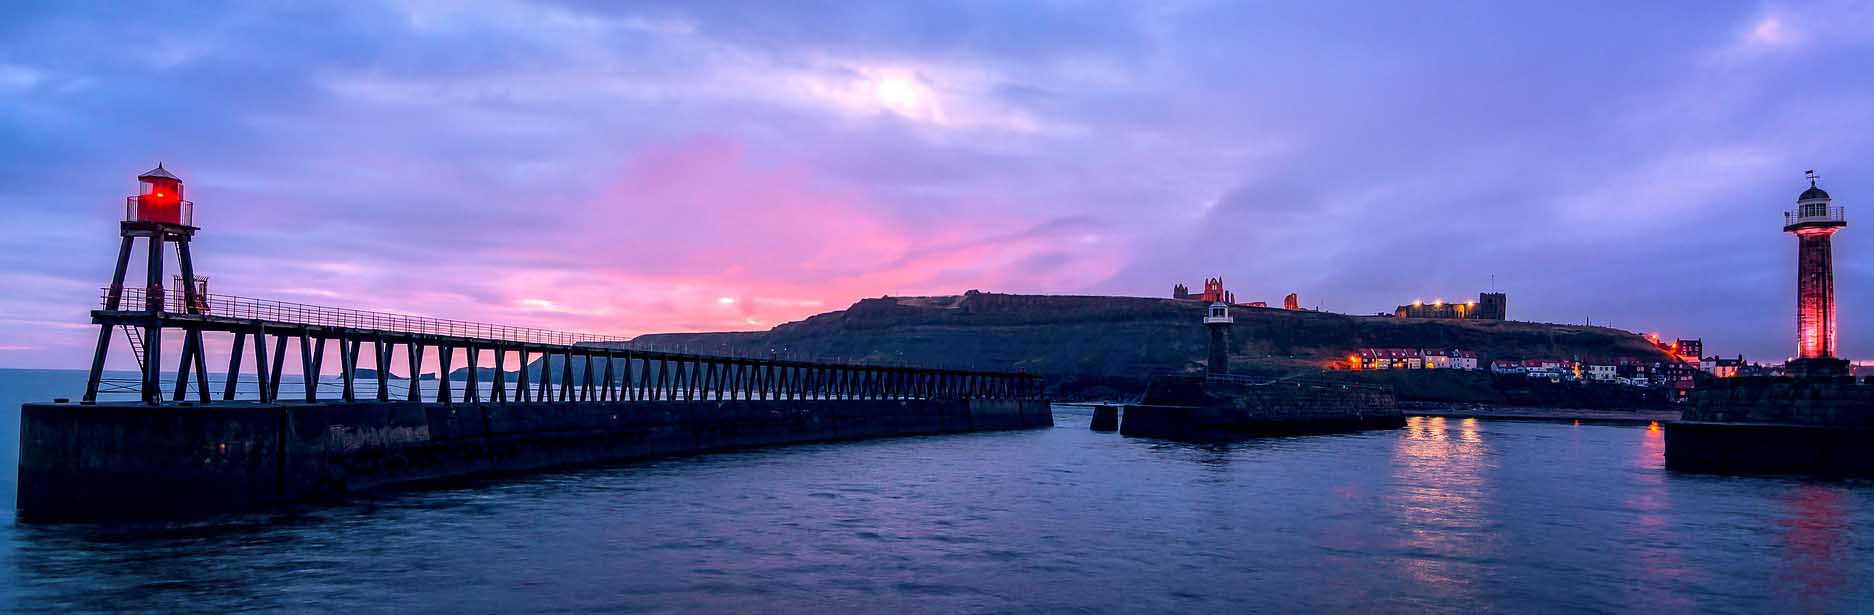 Whitby harbour pier, North Yorkshire